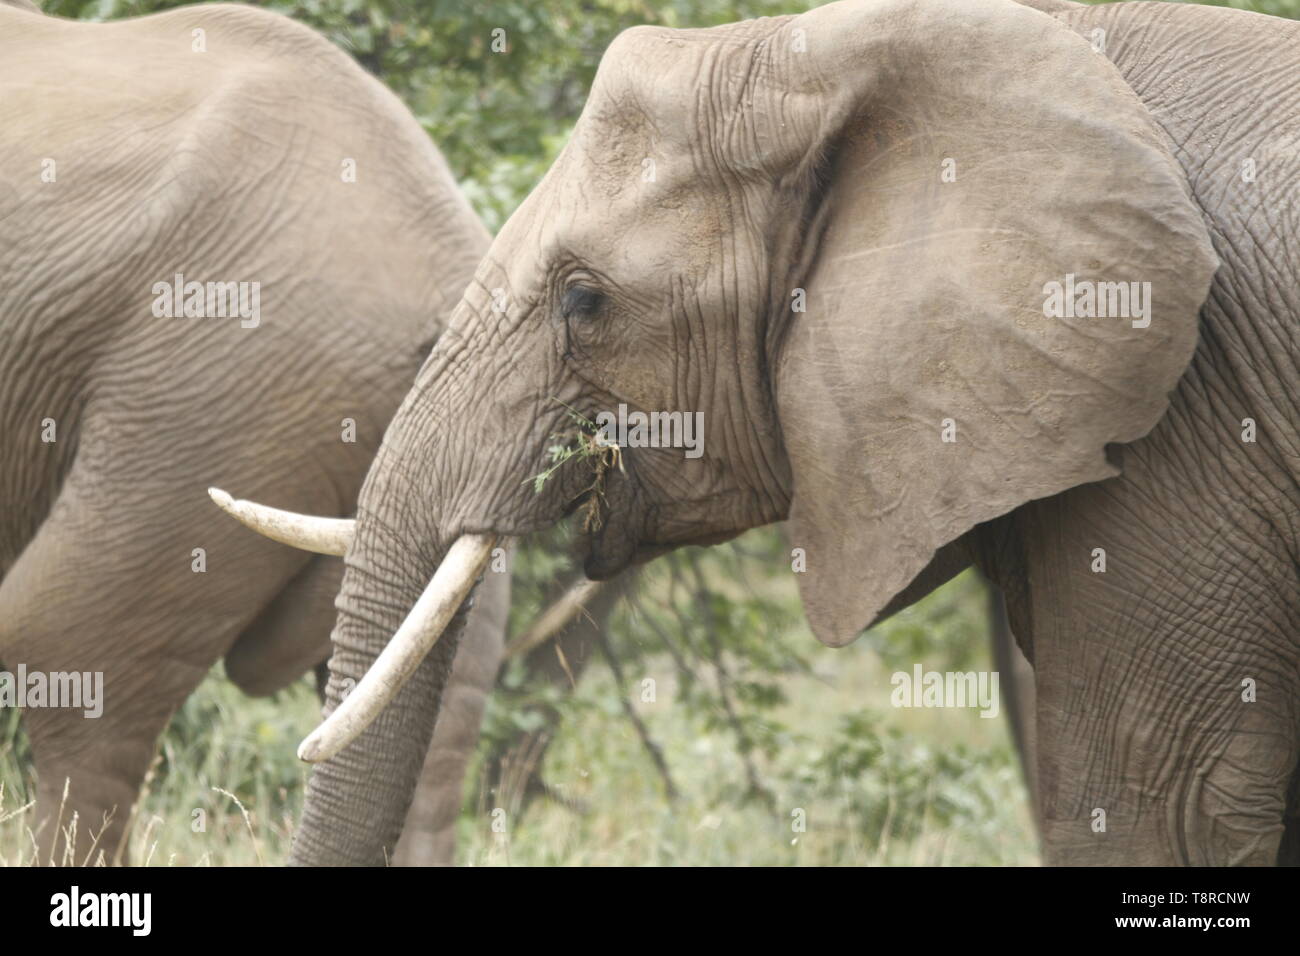 Elephant with uneven tusks eating Stock Photo